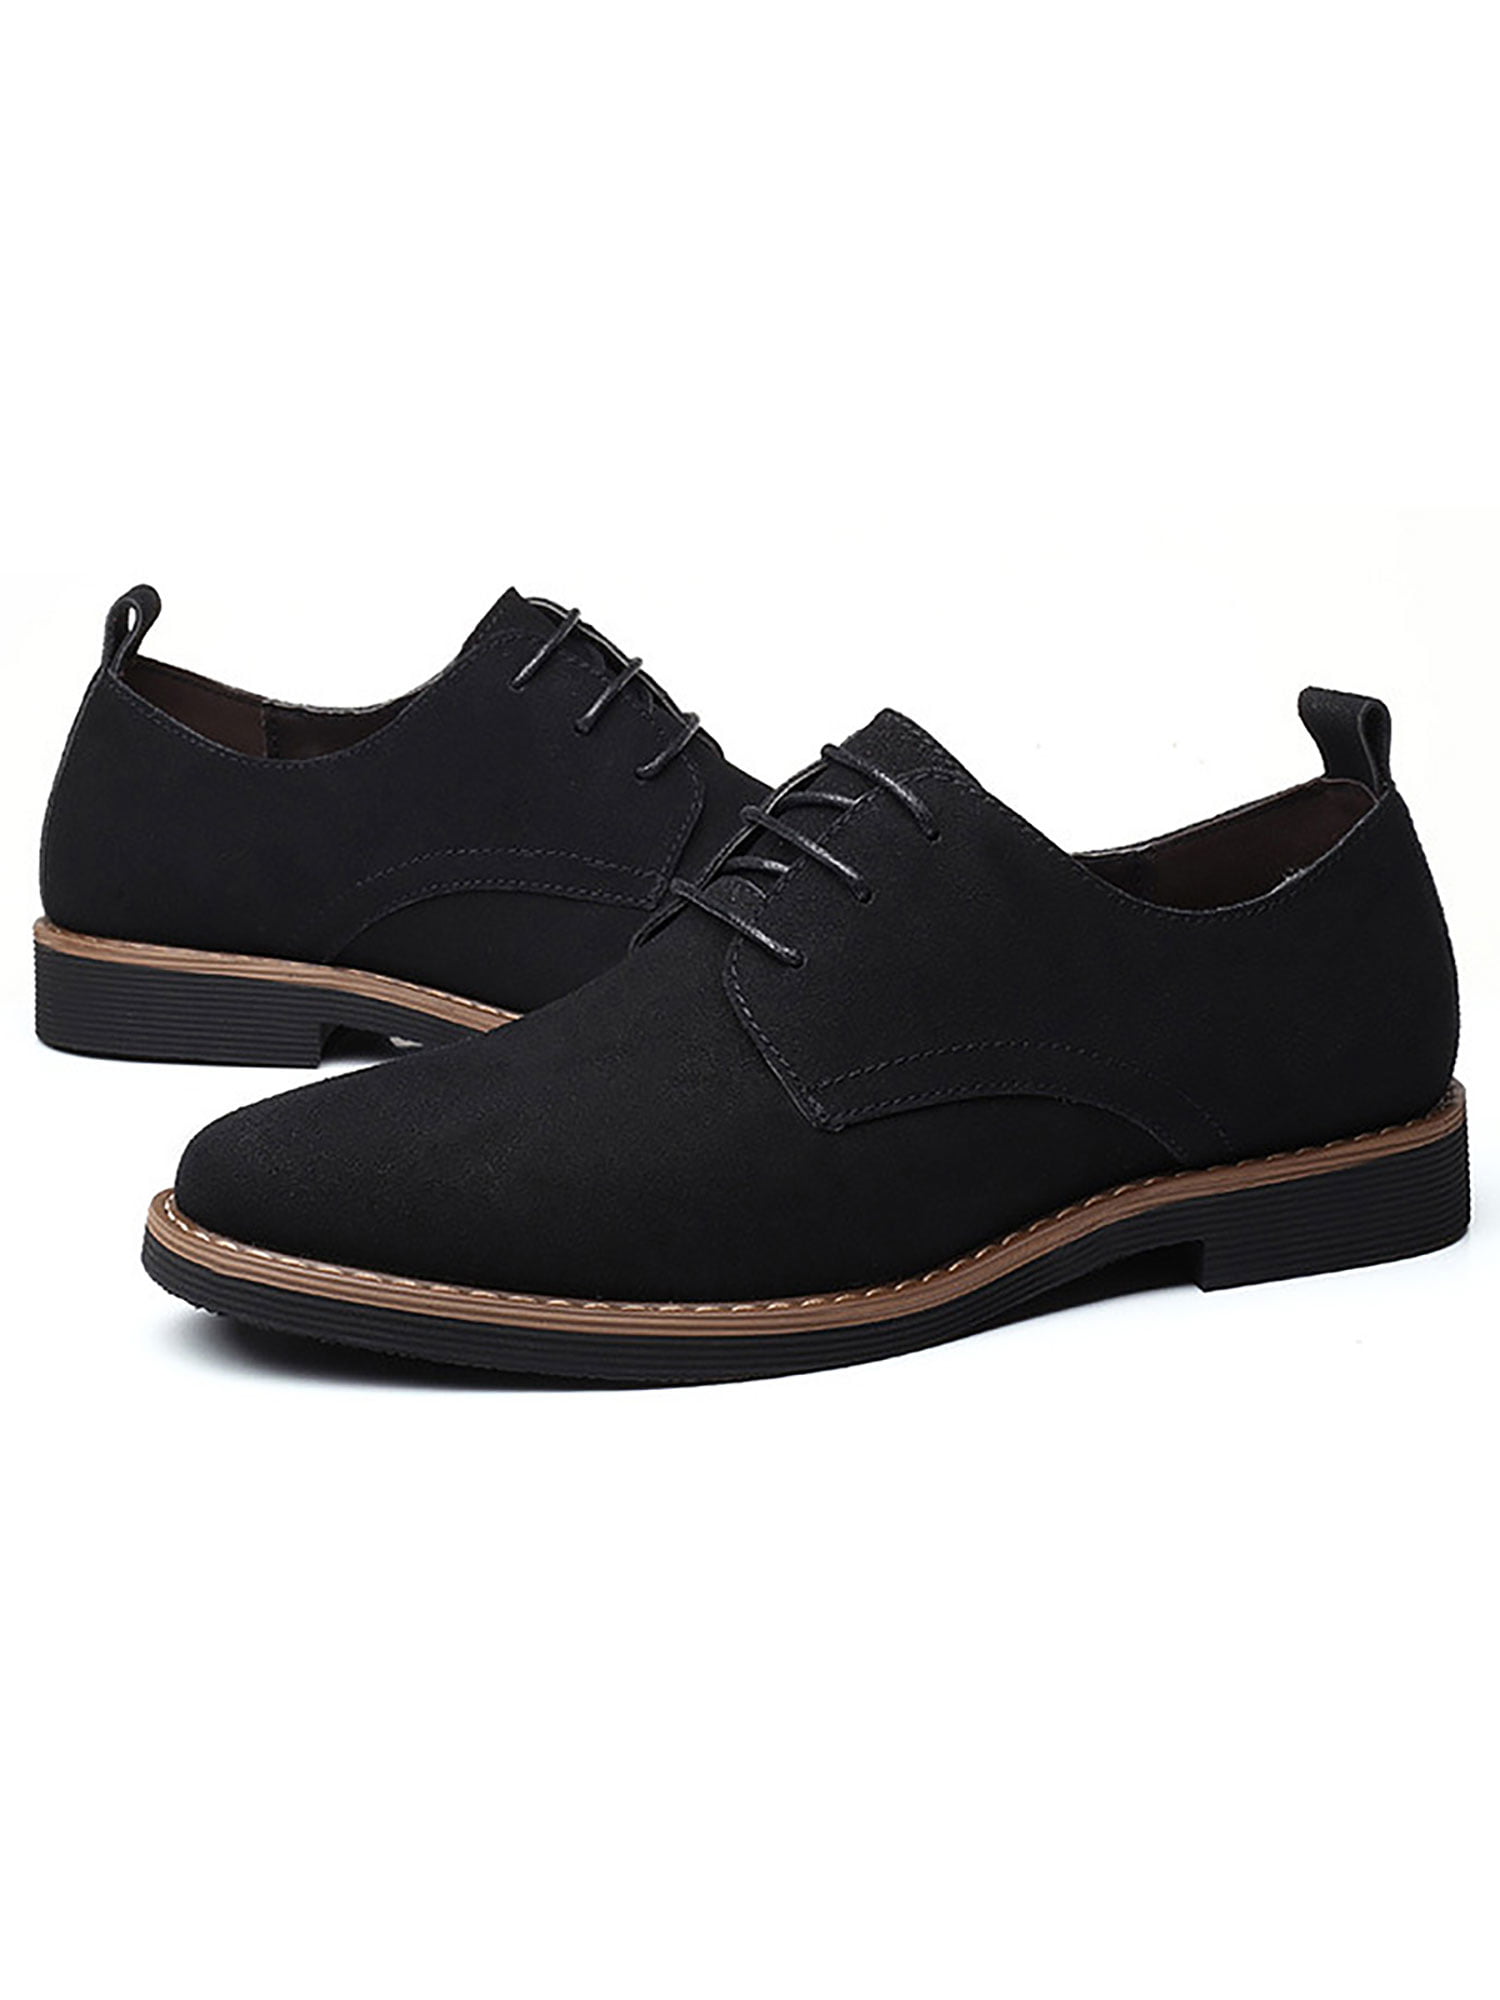 Men Shoes Casual Formal Leather Lace Up Oxfords Loafers Suede Business Man Flats 